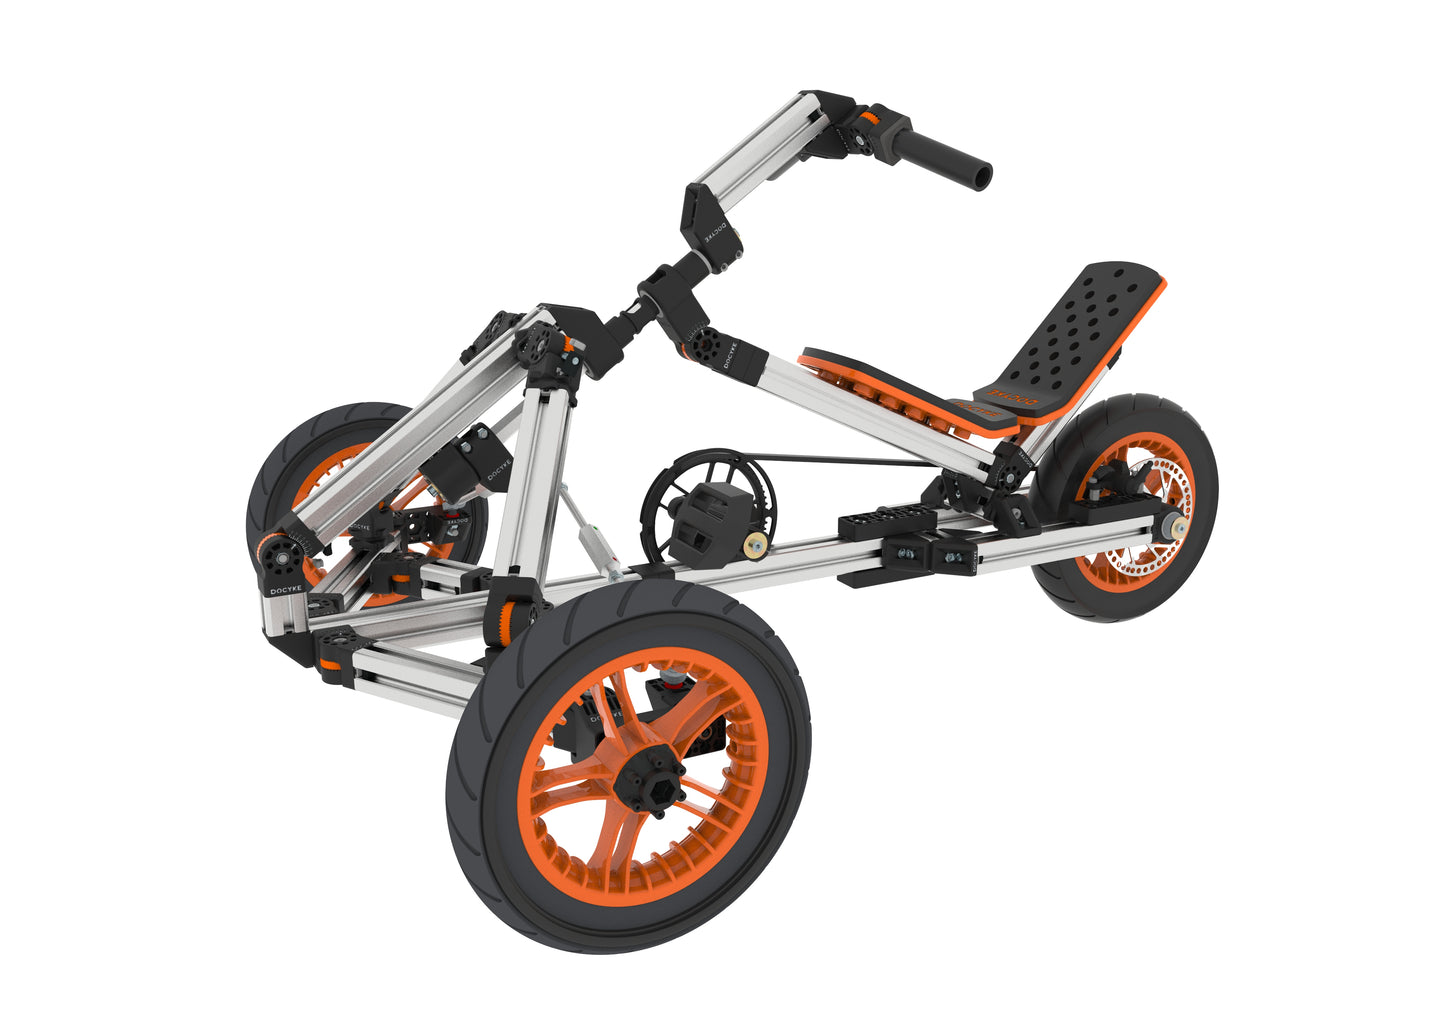 Buildable Kit 20 in 1 Kids Go Kart Set, Suitable for 1 to 8 Years Old, Two Wheel Bike, Three Wheel Bike